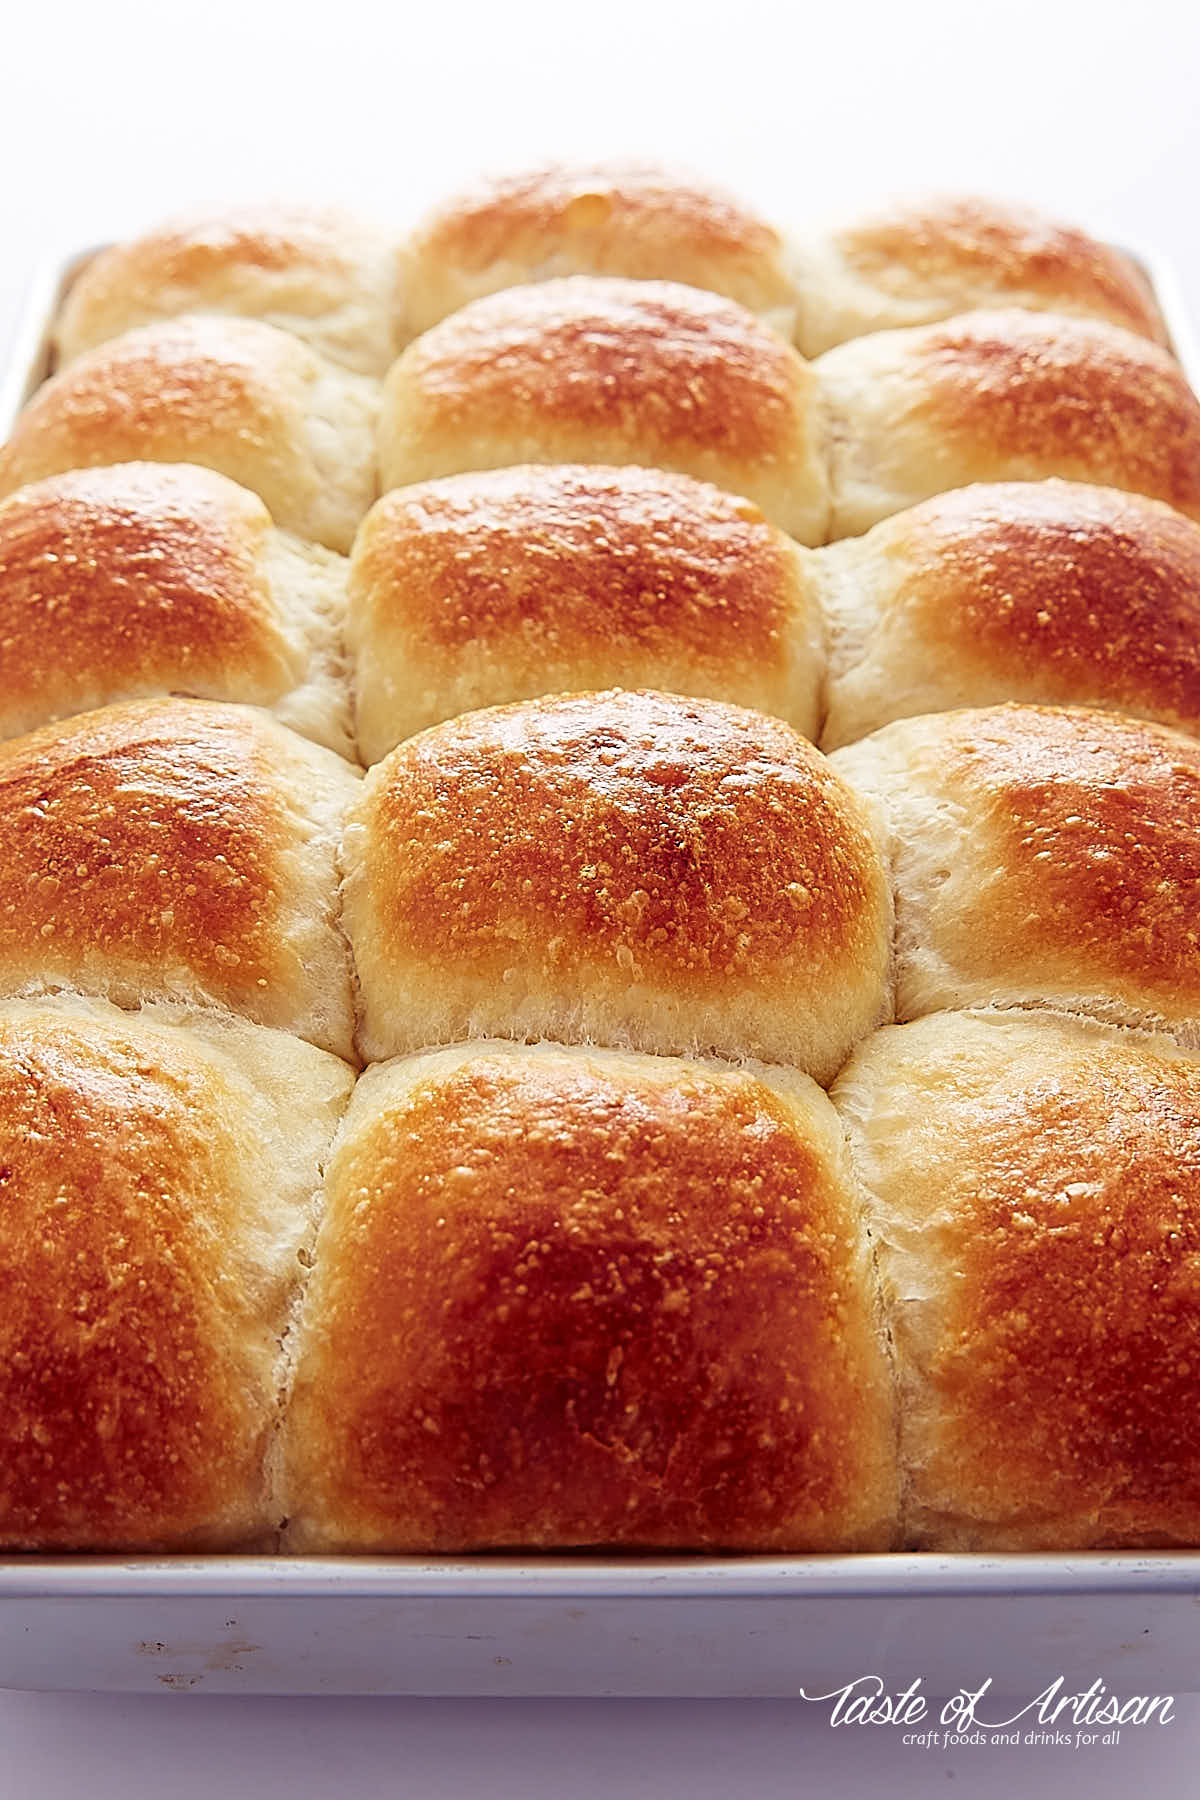 Angle view of a baking pan full of golden brown topped yeast rolls in a baking pan.